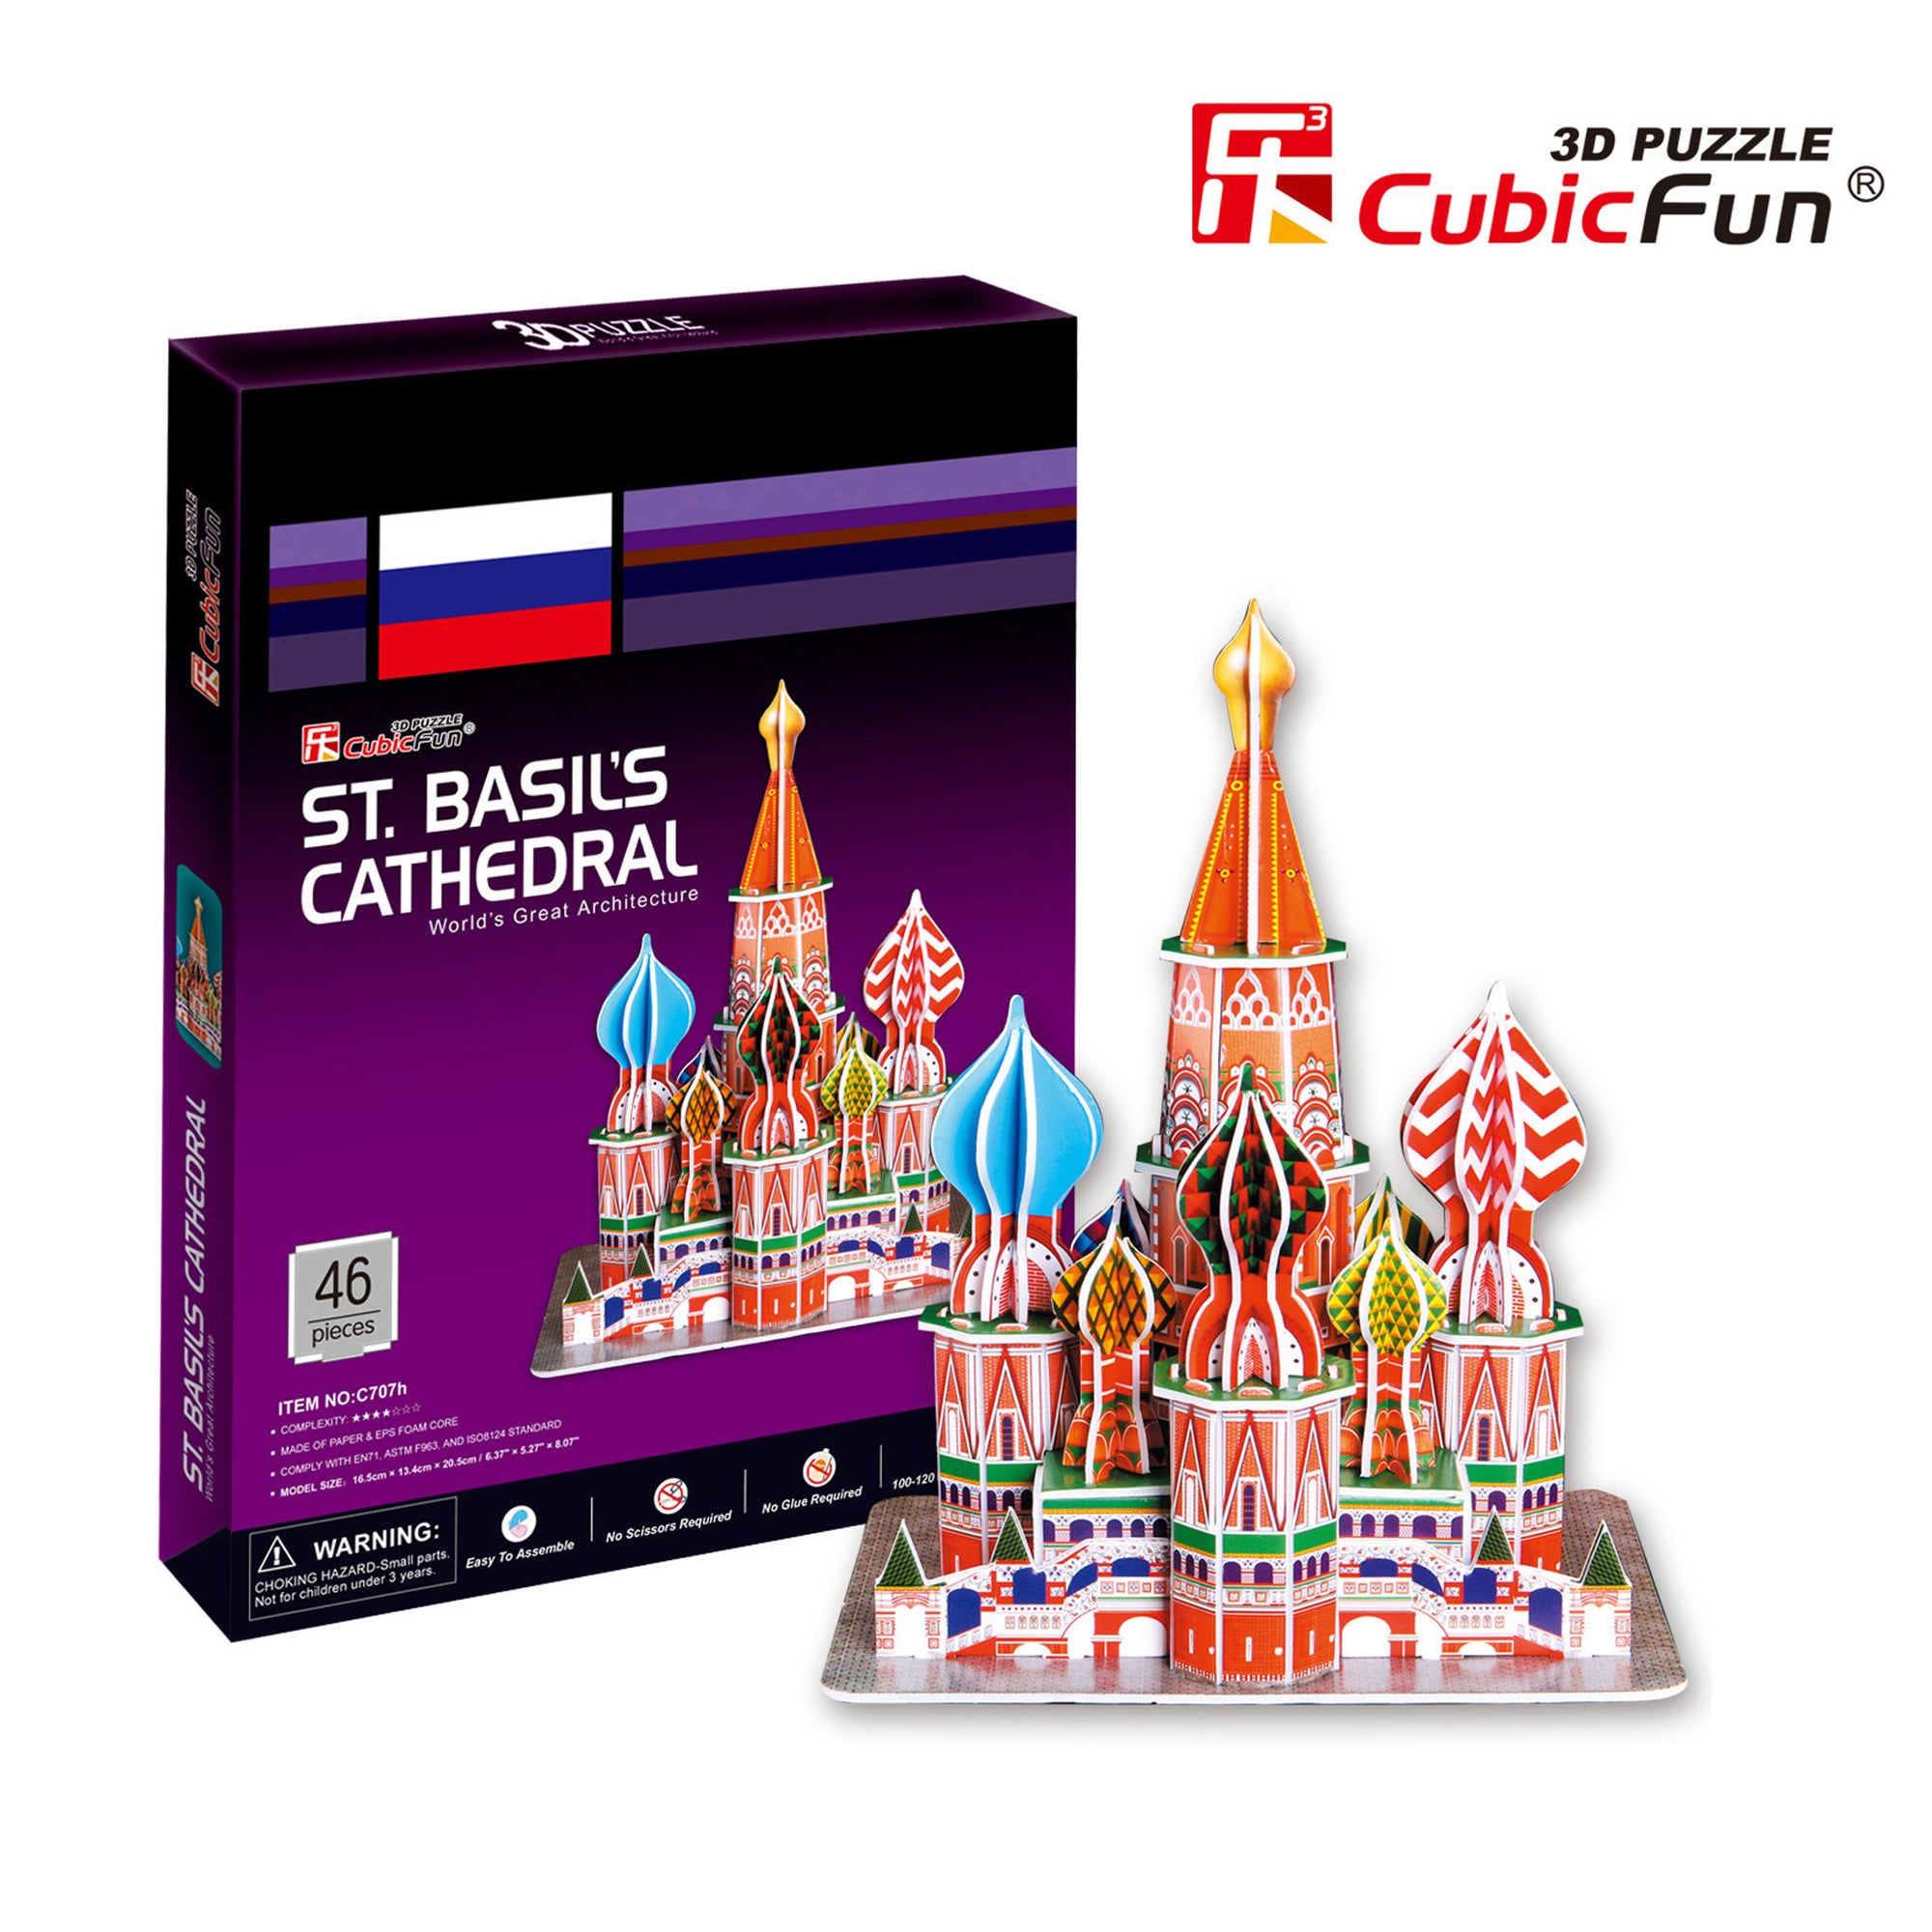 St. Basil's Cathedral, 46pc 3D Puzzle